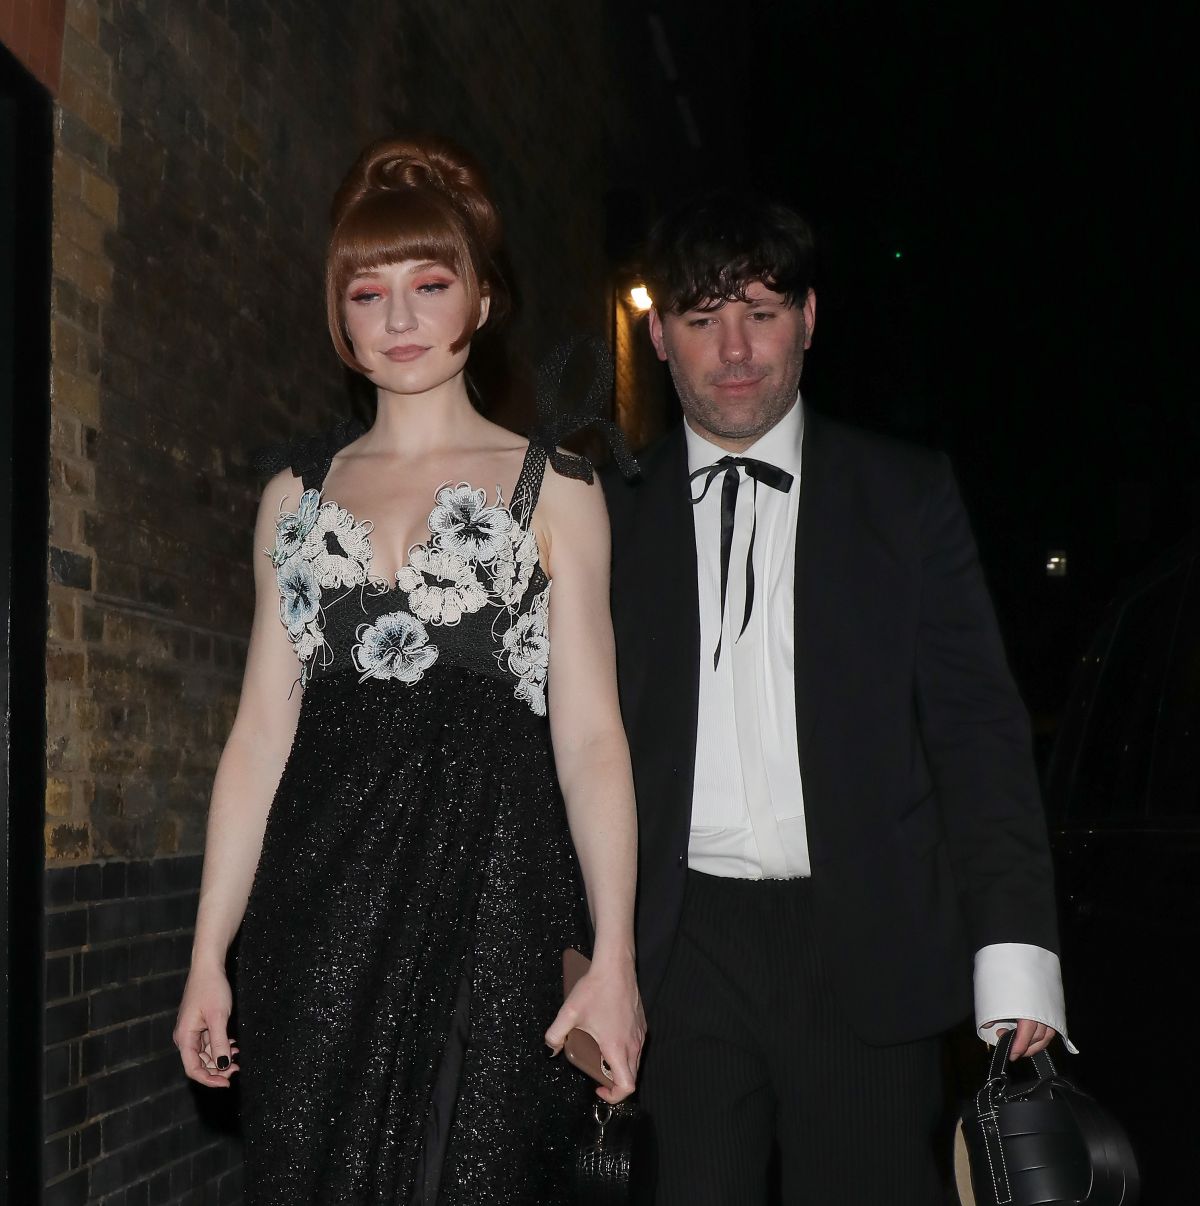 Nicola Roberts Arrives British Fashion Awards Afterparty Chiltern Firehouse London